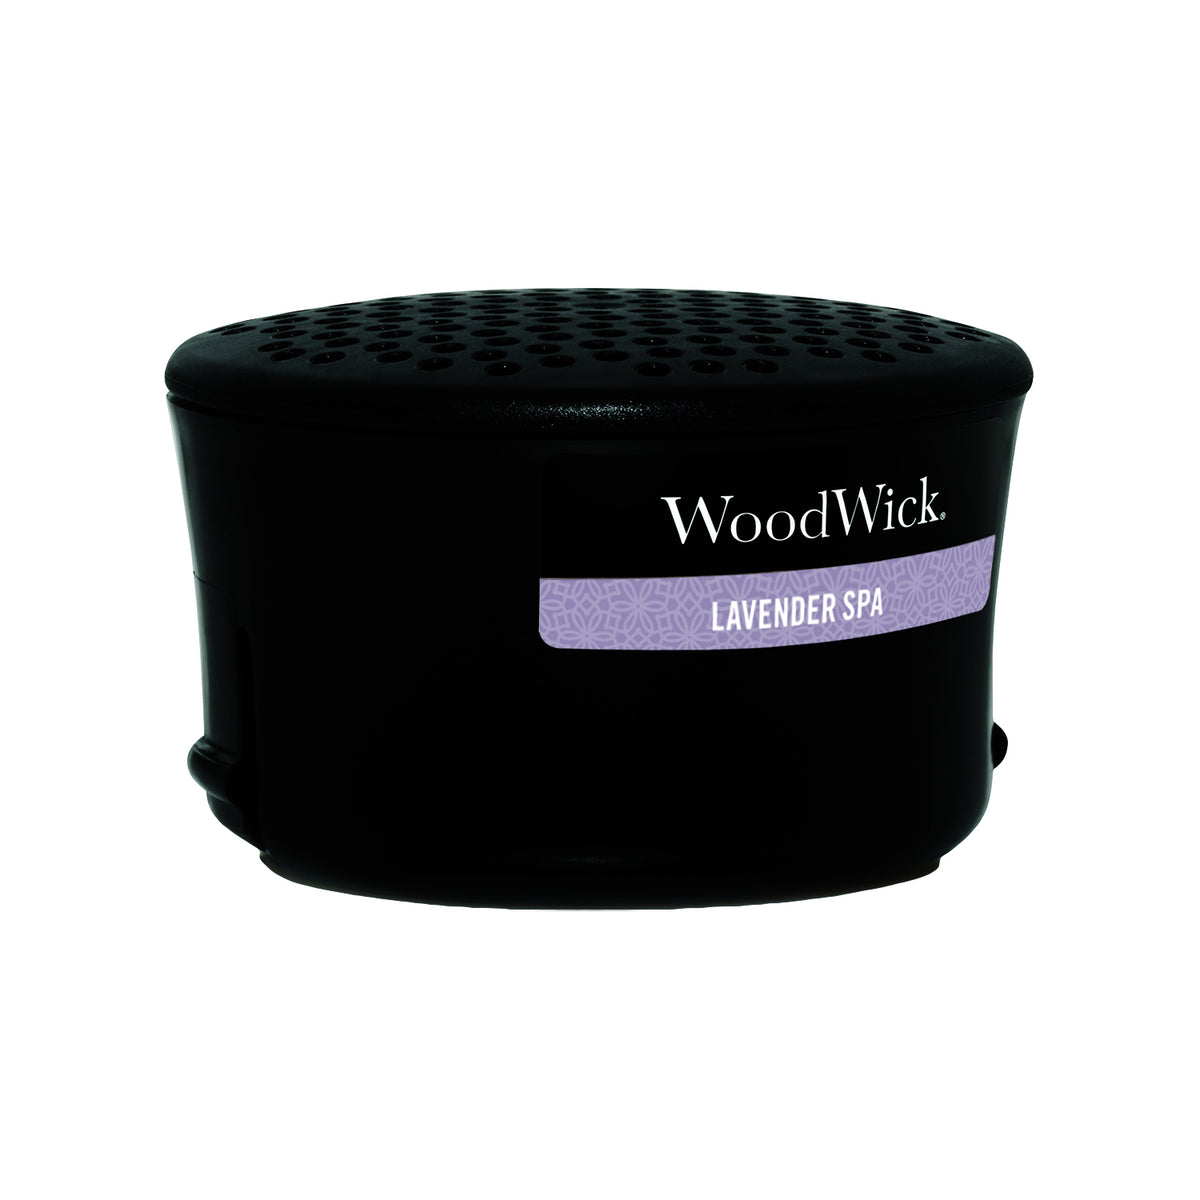 Woodwick Radiance Diffuser Refill - Lavender Spa